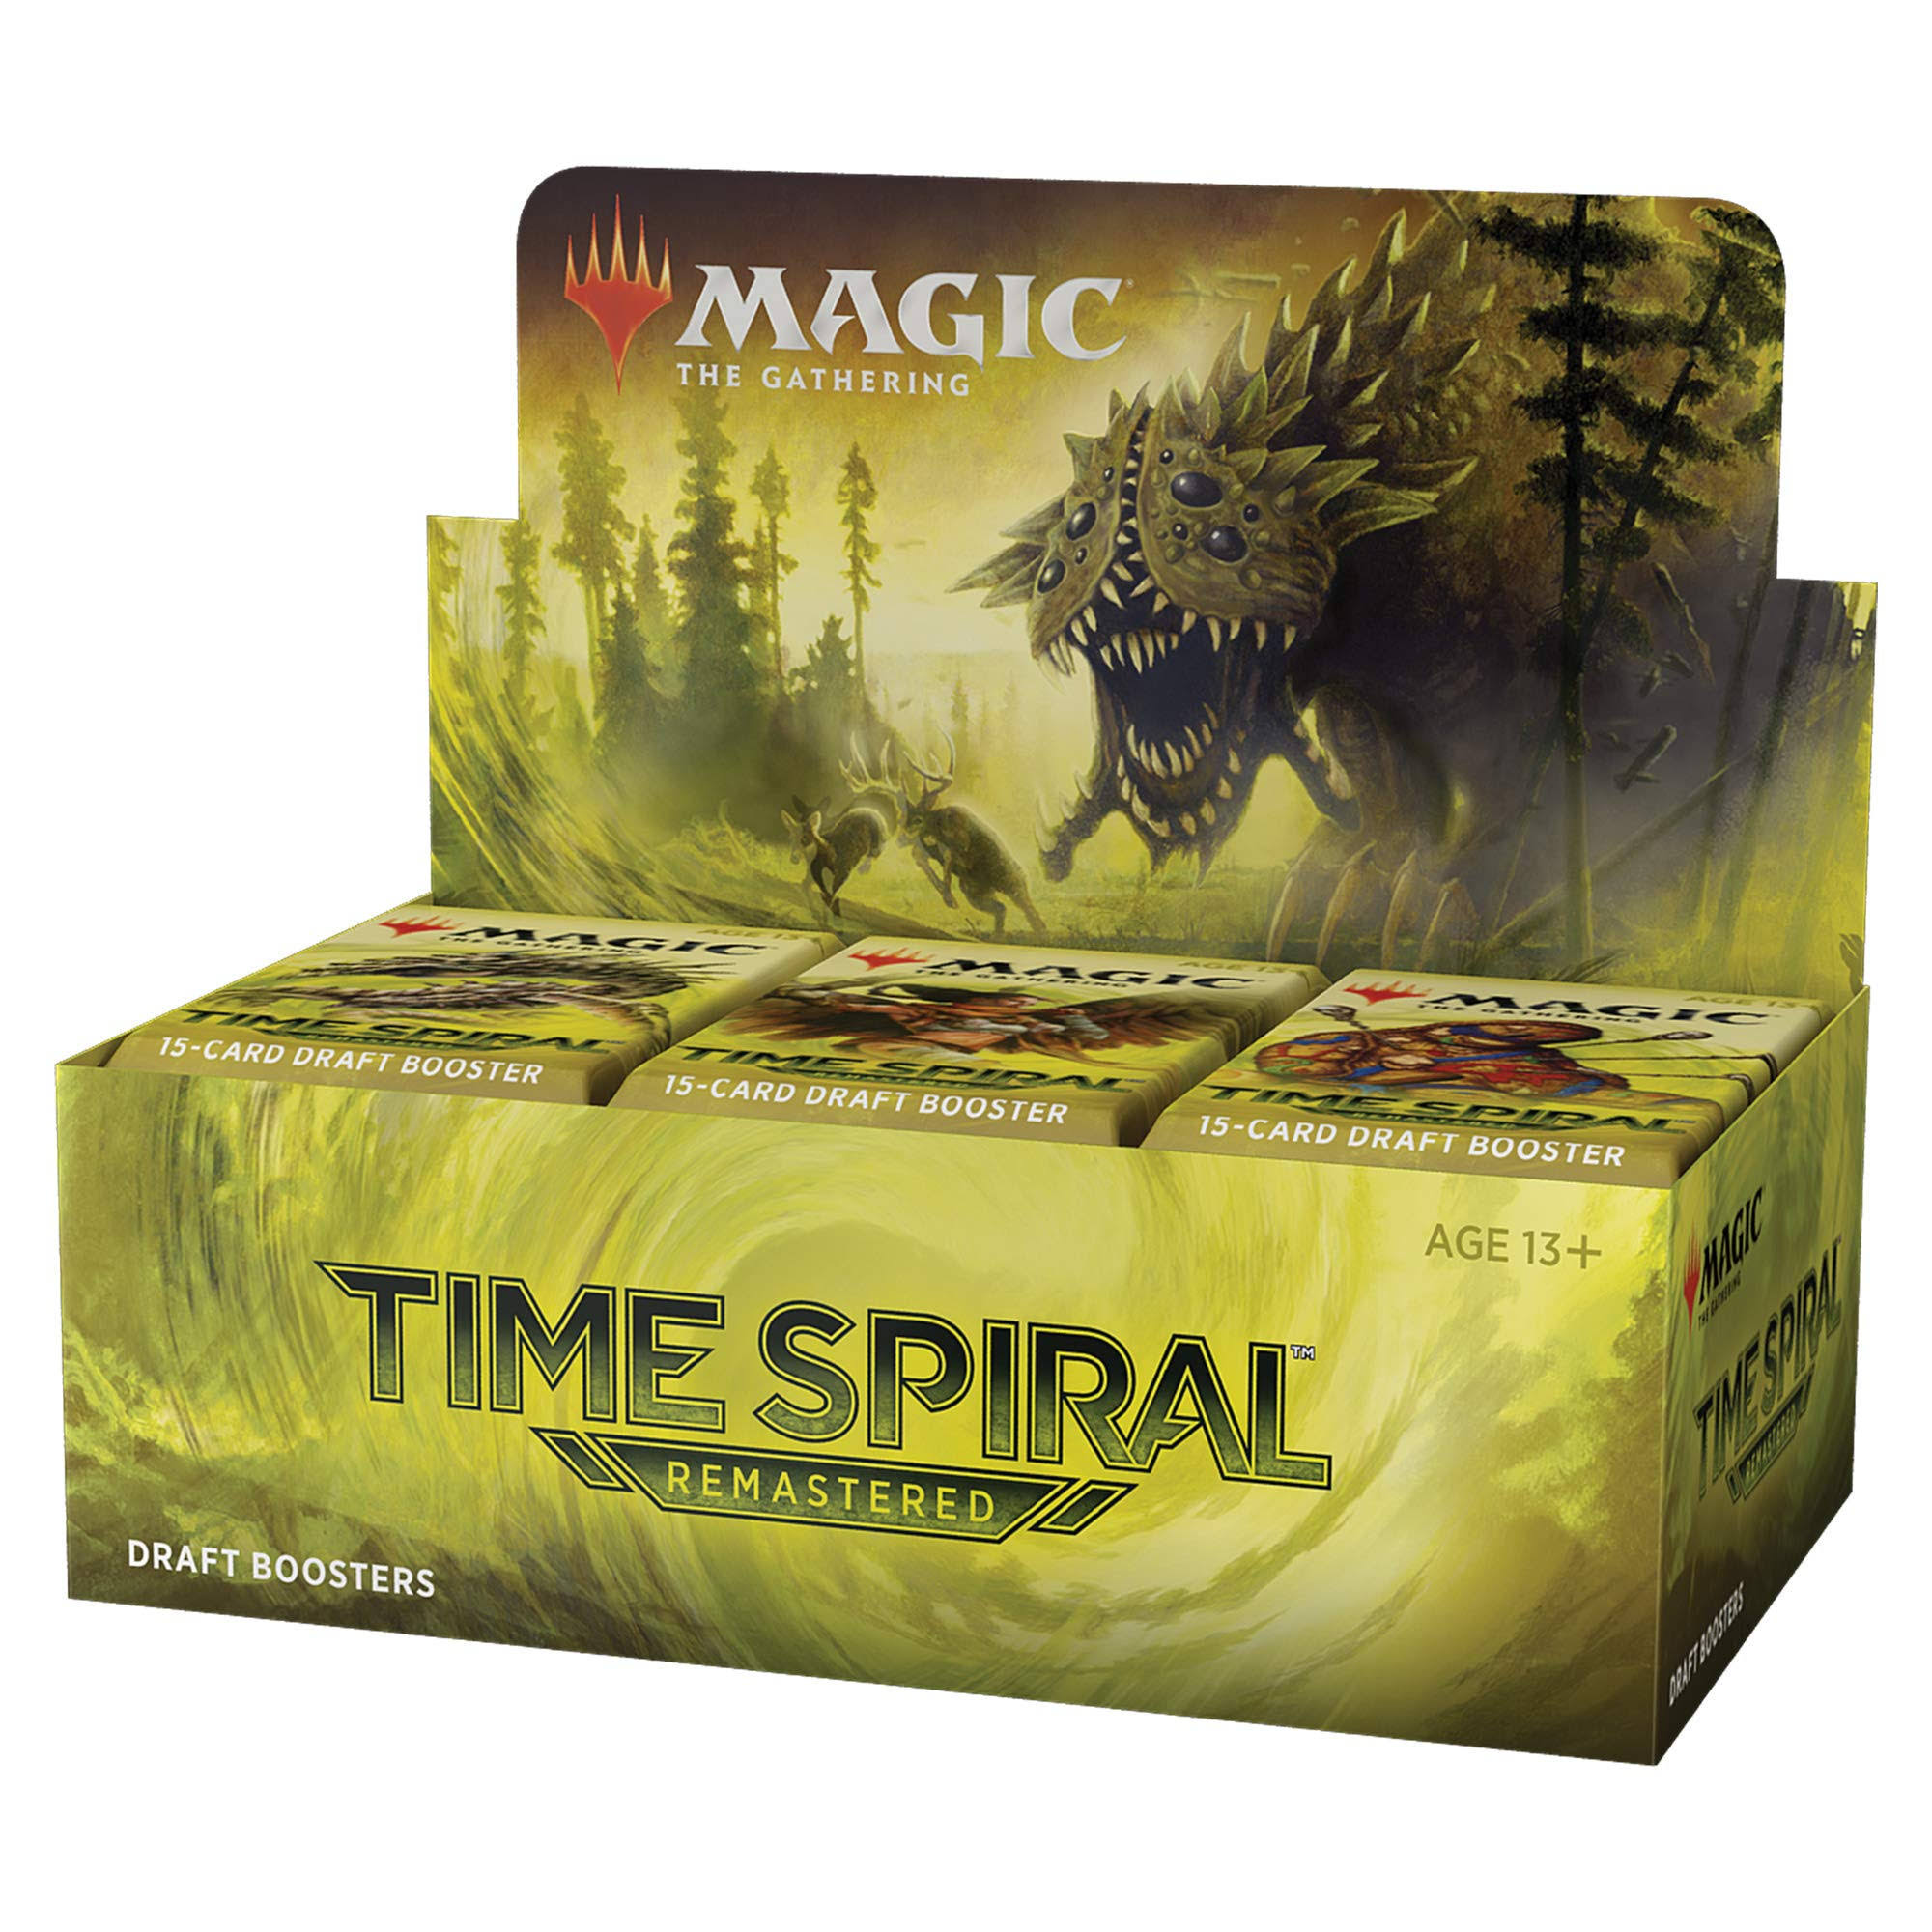 Magic The Gathering Time Spiral Draft Booster Box